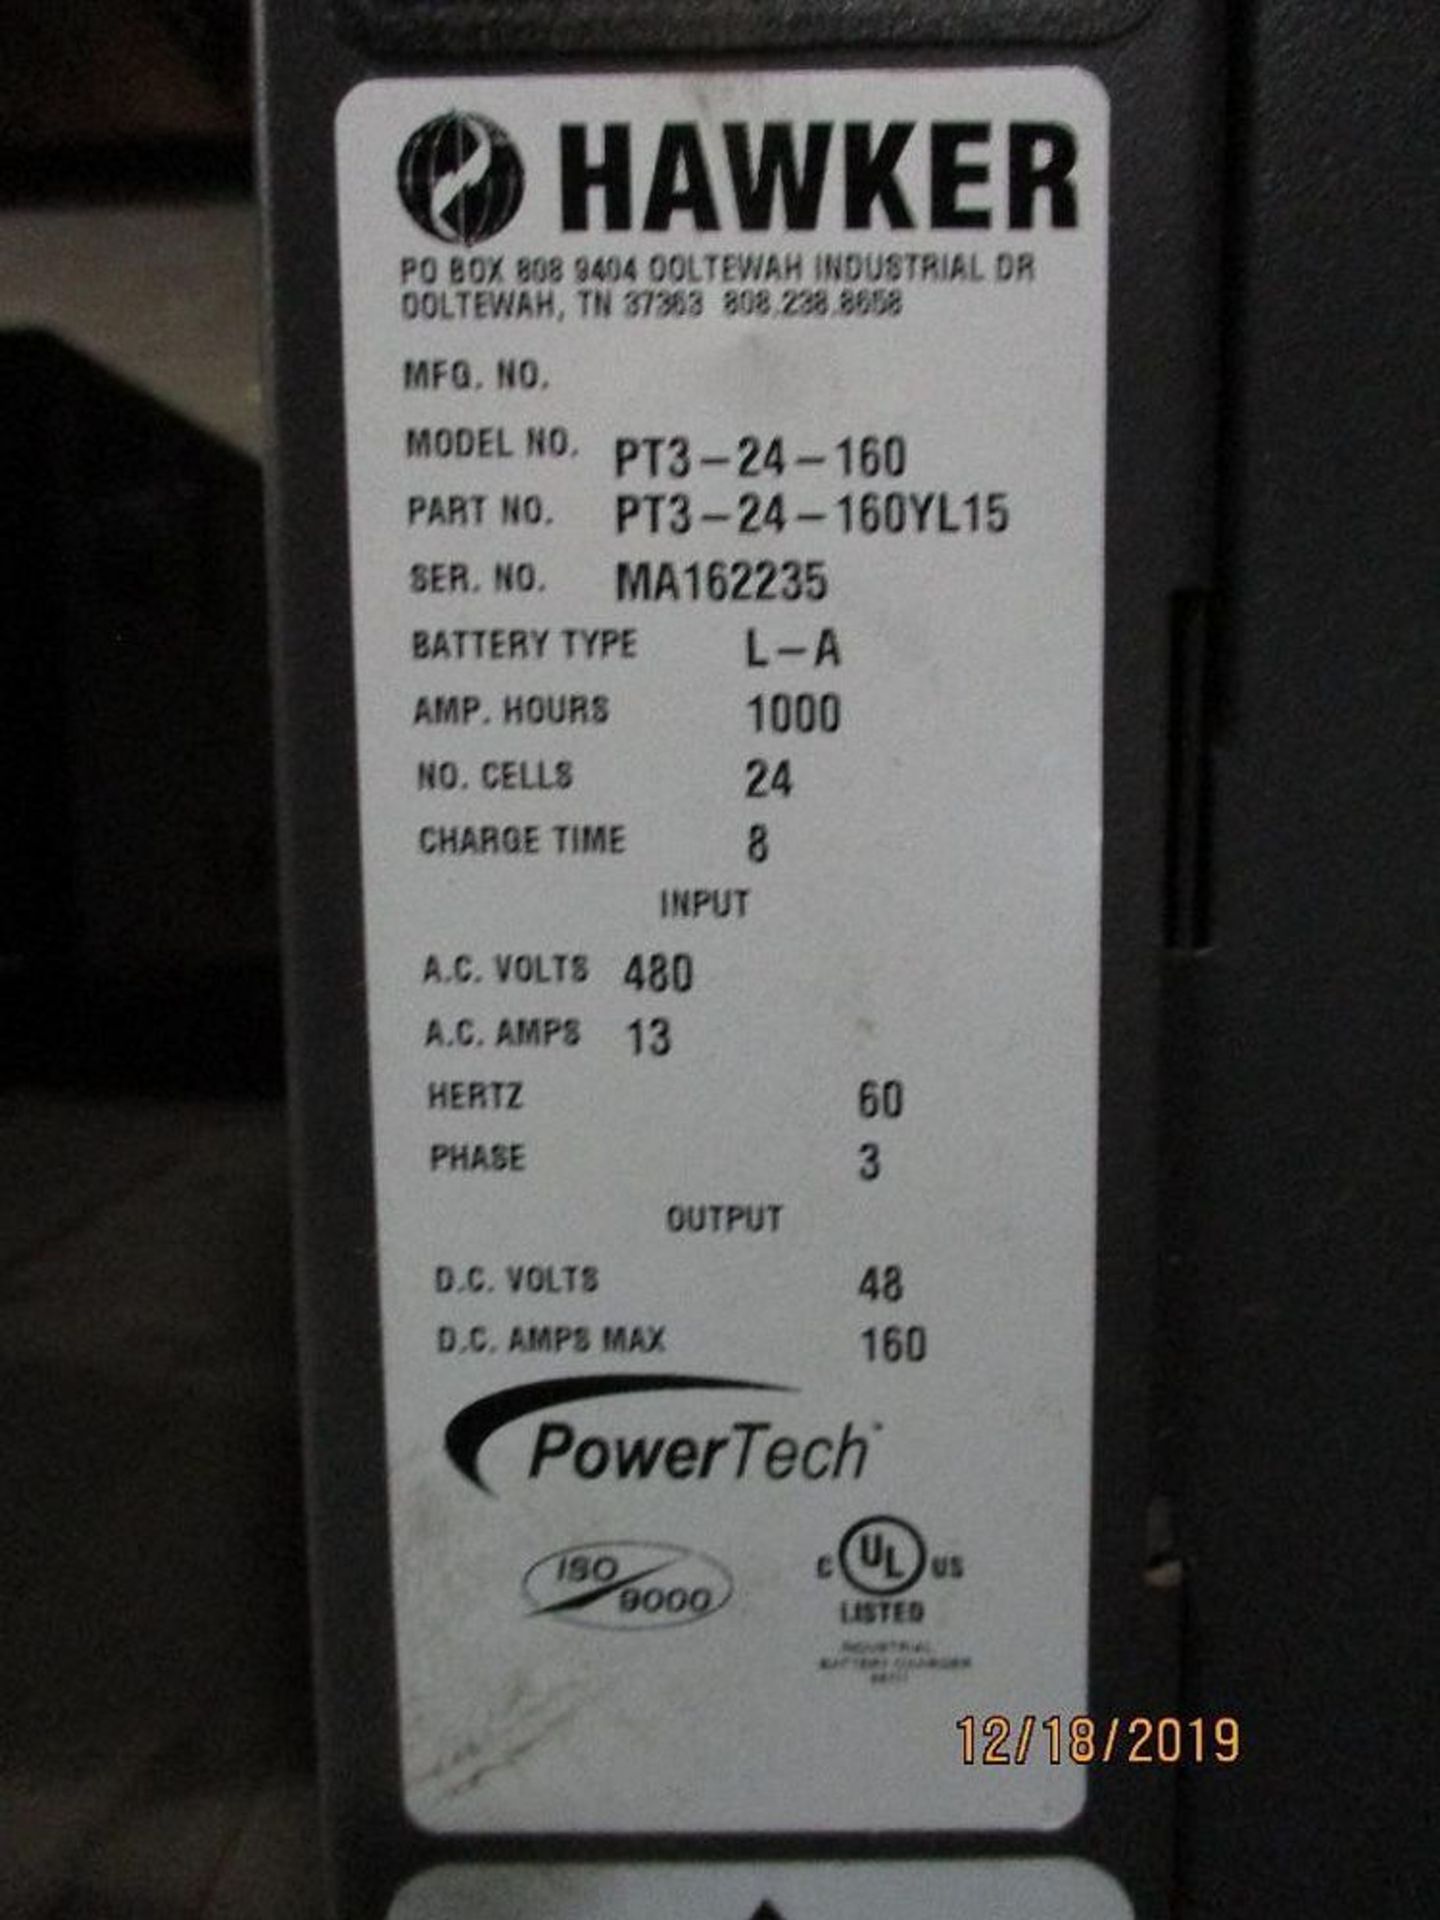 Hawker Powertech Battery Charger, 480v, 13amp, 3ph, M/N PT3-24-160 S/N MA162235 - Image 2 of 2